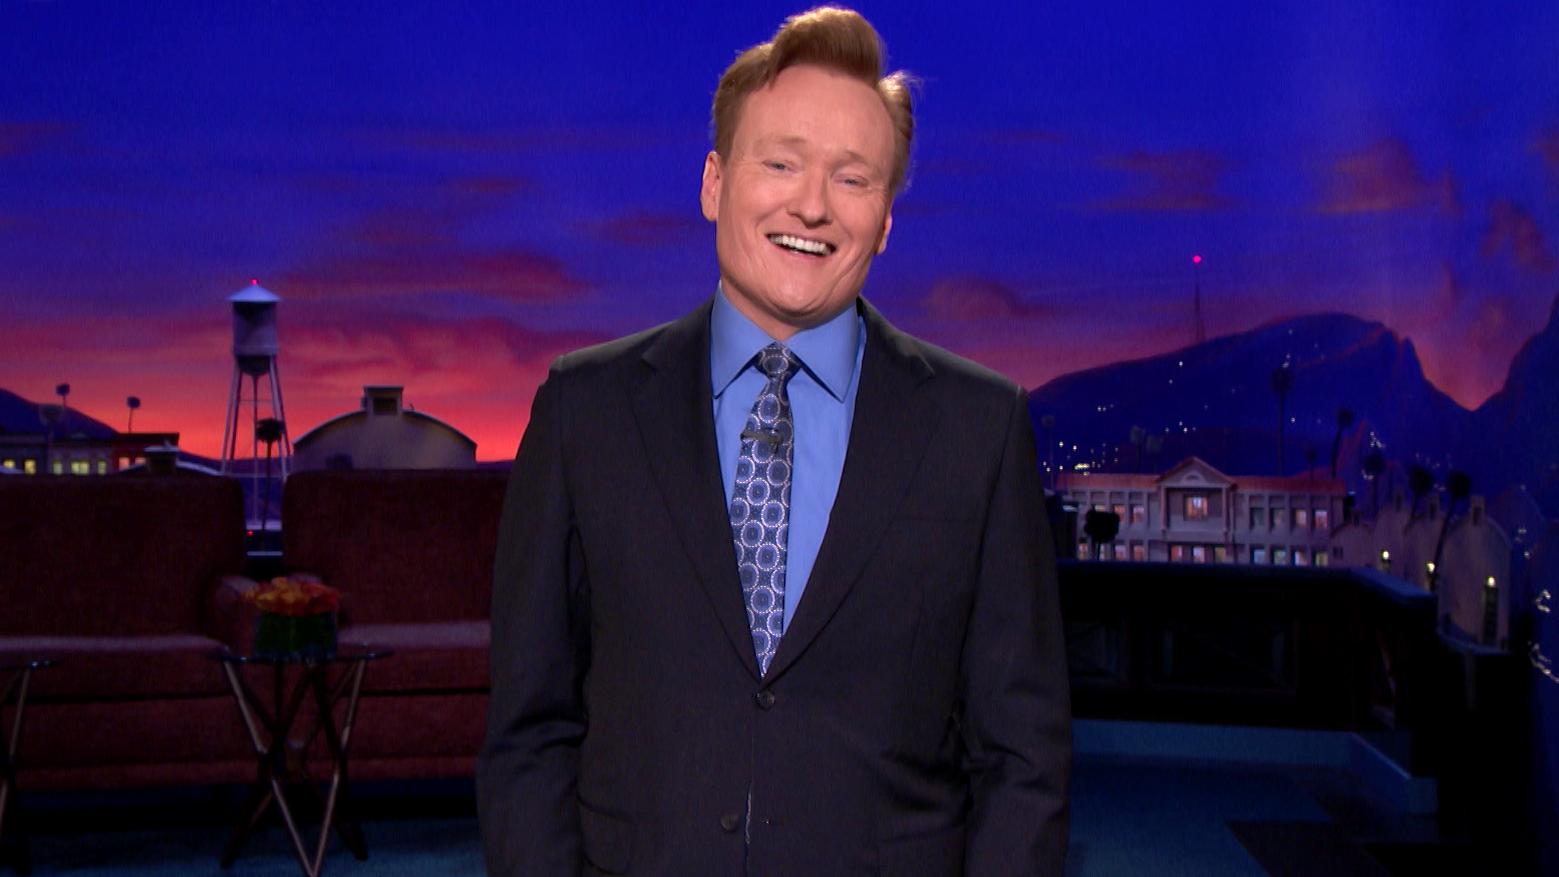 Conan moving to half-hour format in 2019, leading national stand-up comedy tours